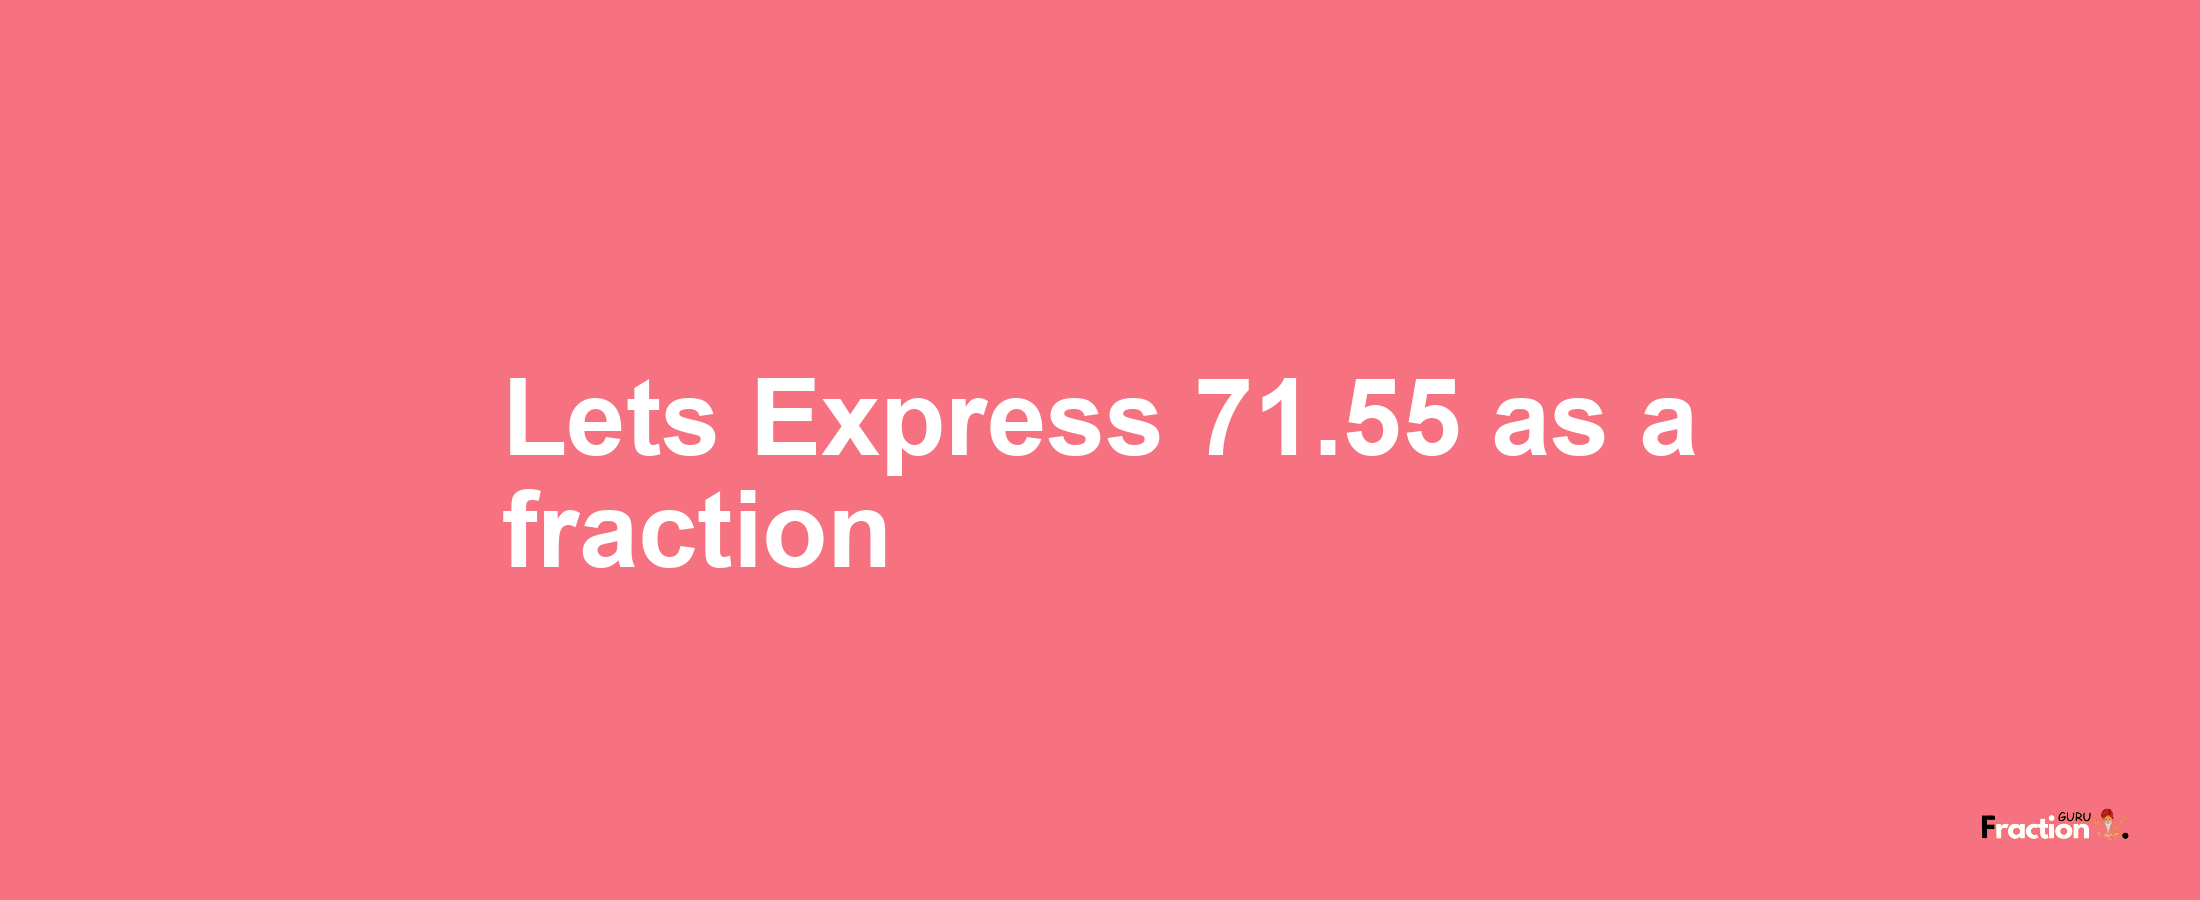 Lets Express 71.55 as afraction